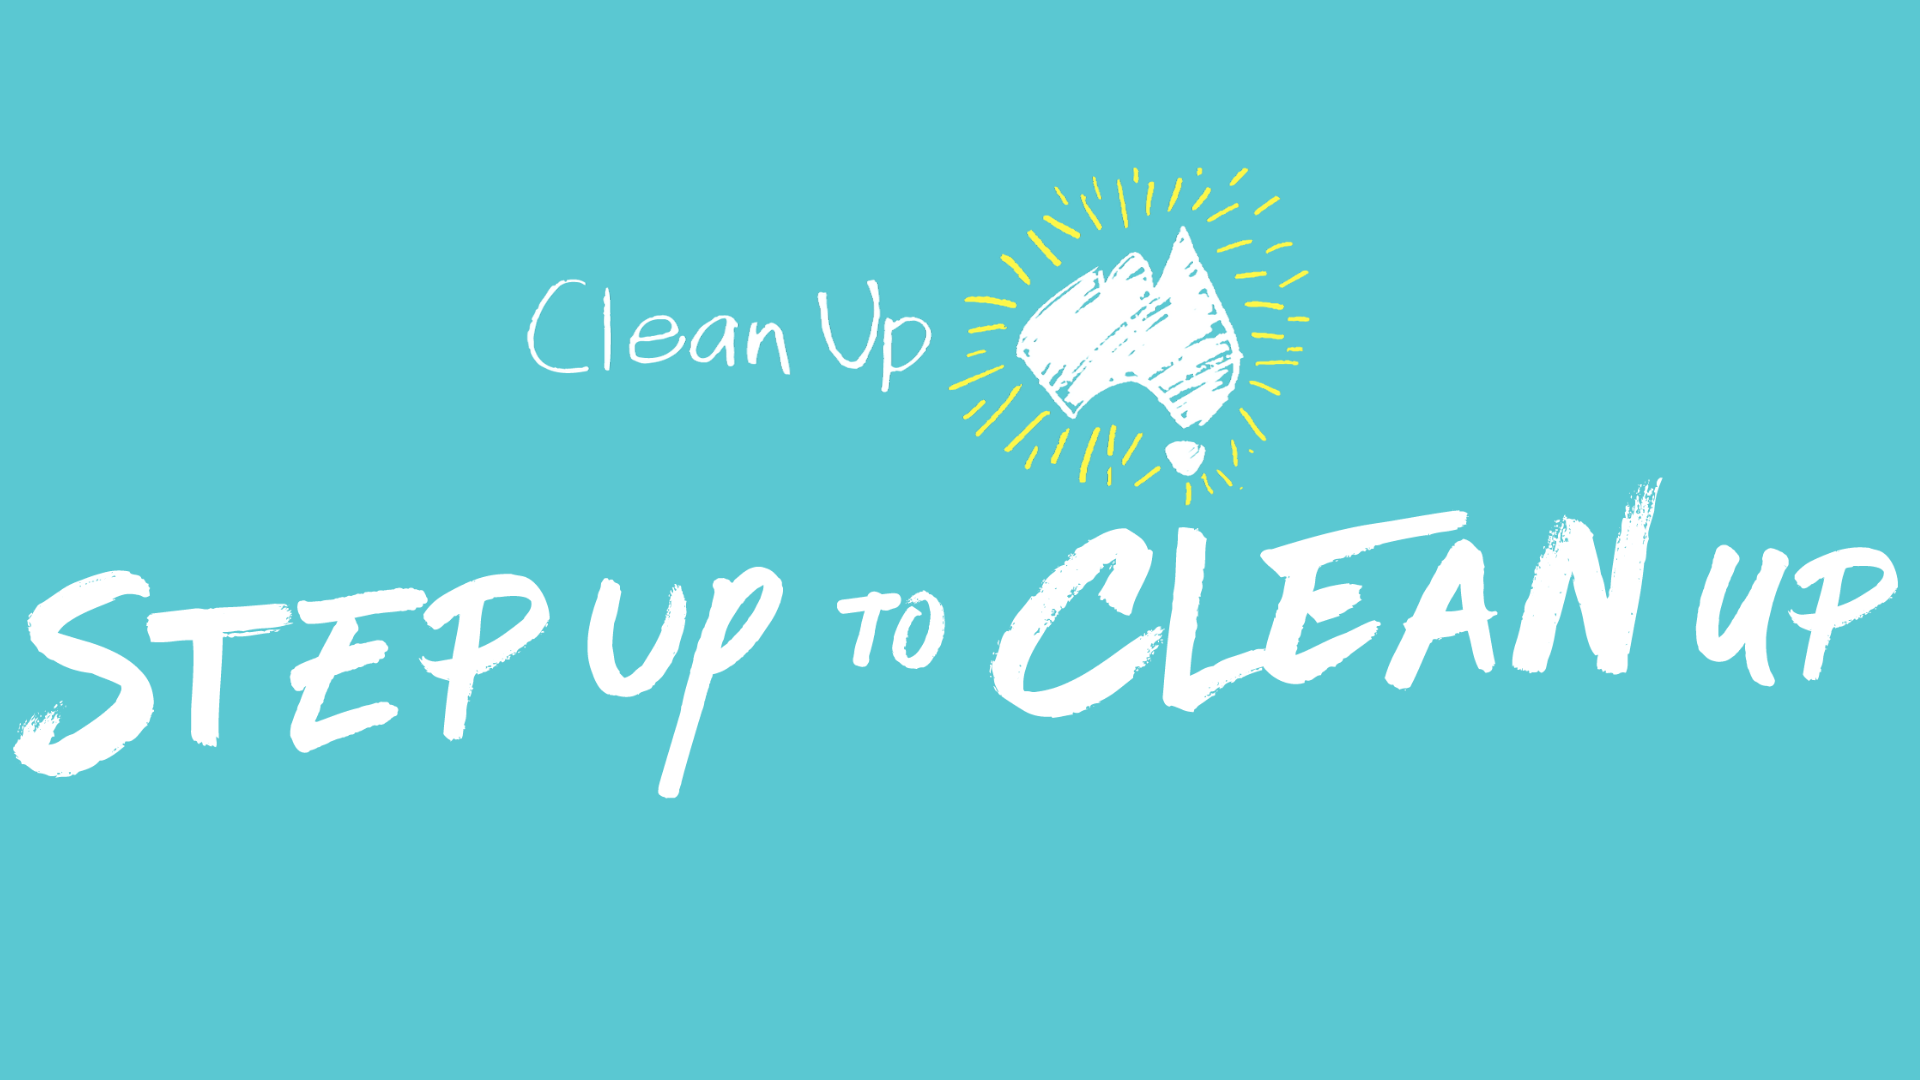 Media Release - Will you Step Up this Clean up Australia Day - 2 March 2022